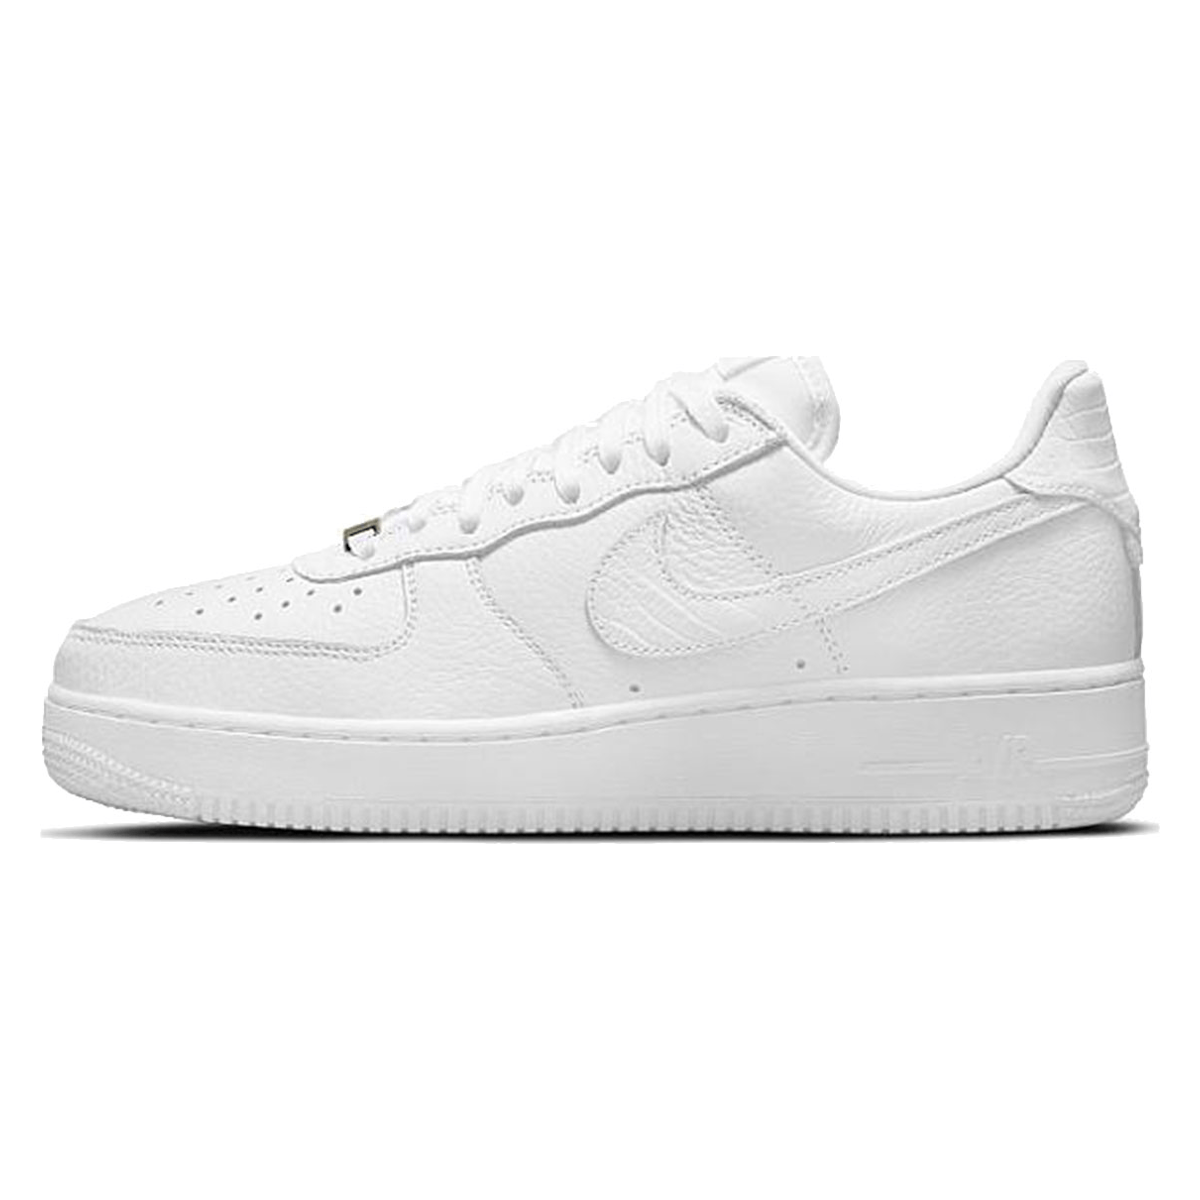 Nike Air Force 1 Low 07 Craft Quadruple White